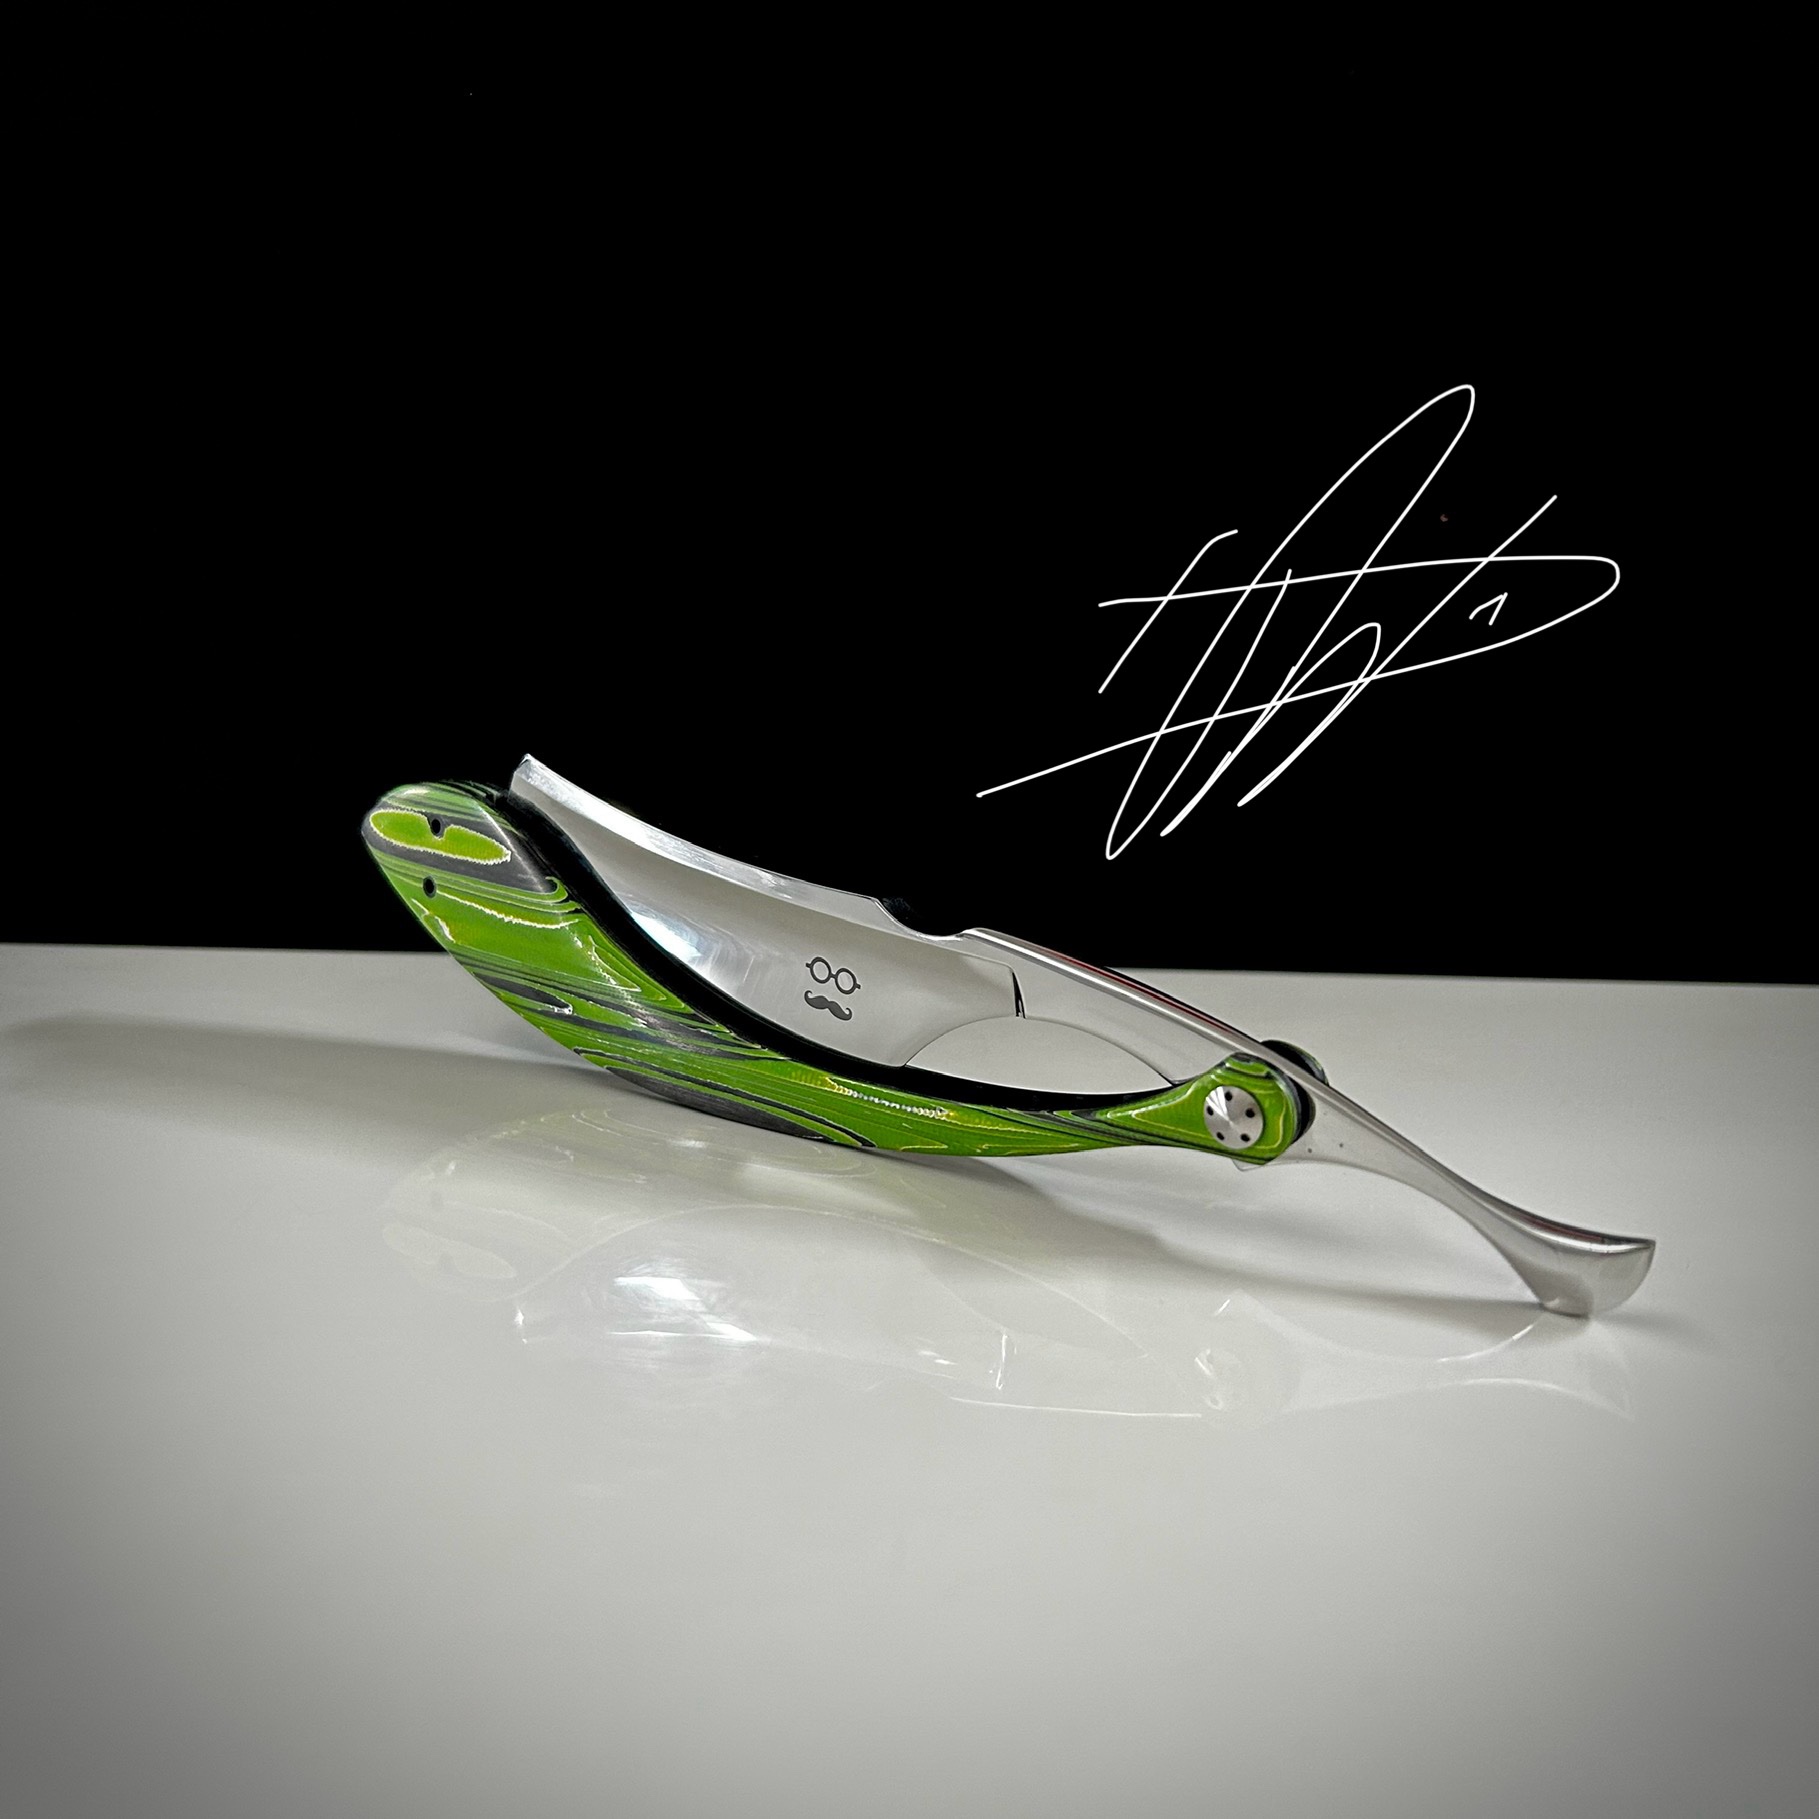 Woolfblades 385 Custom Made in a RWL 34 mirror chrome polish and full hollow grind 6/8 And the scales are made in a Green Carbon fibre with carbon fibre inlays and carbon fibre pin